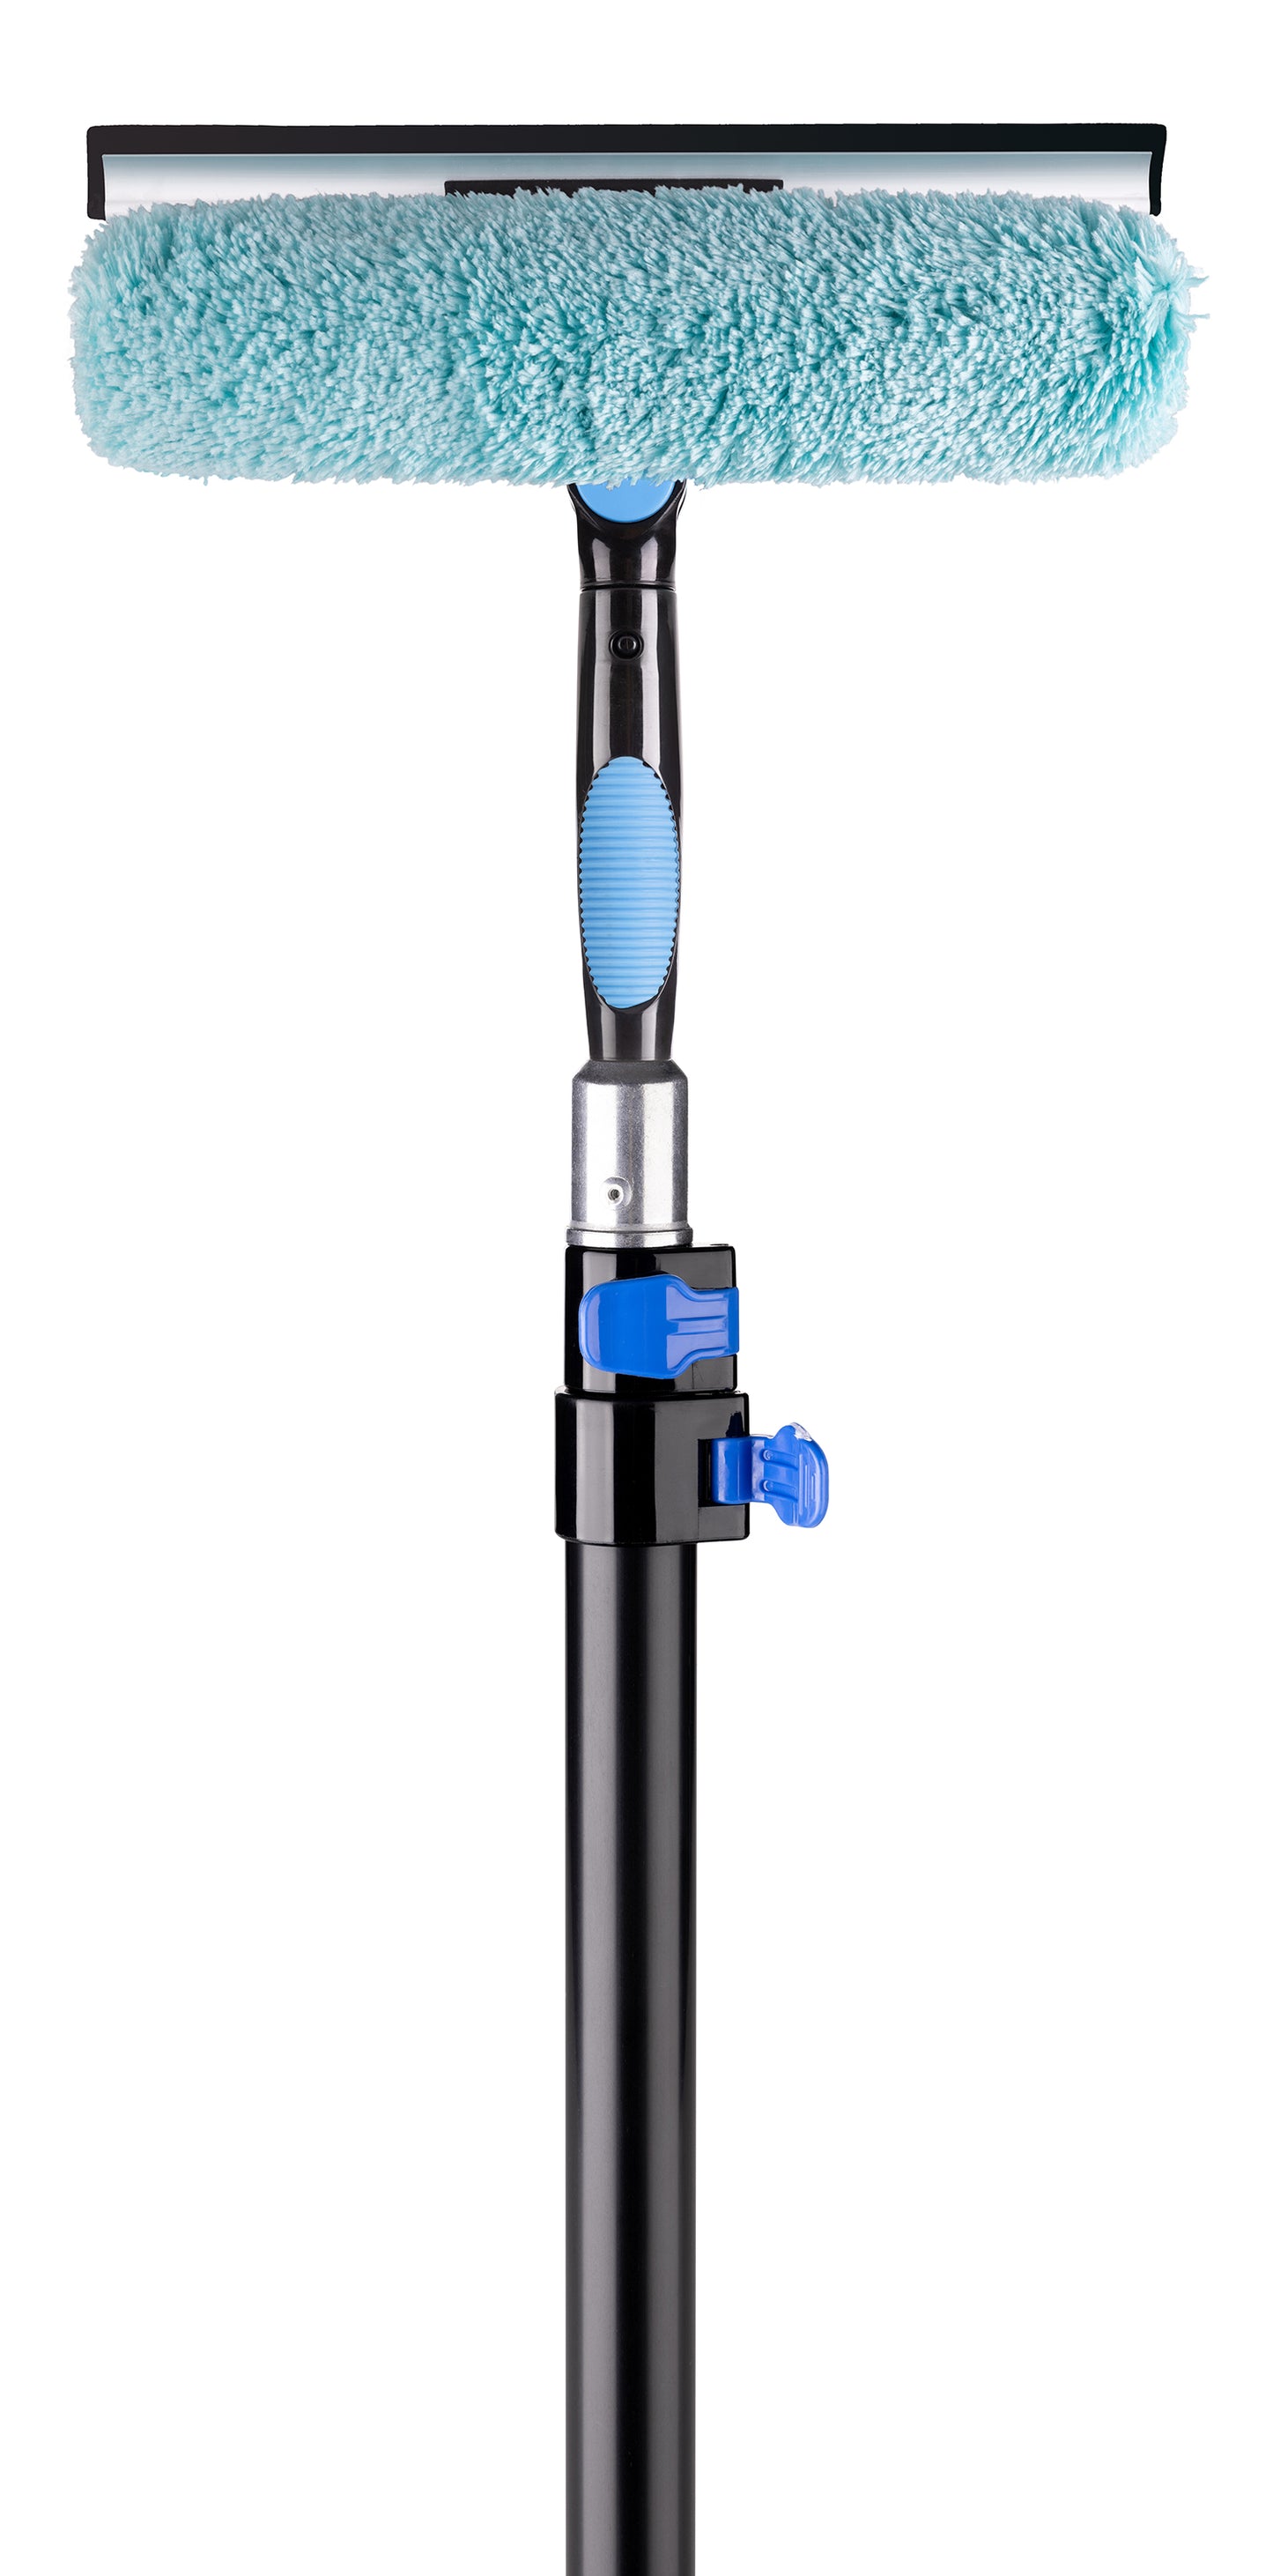 Window Cleaner Twist-On Indoor & Outdoor Cleaning Fits Standard 3/4 Inch Threaded Poles (Pole Not Included)